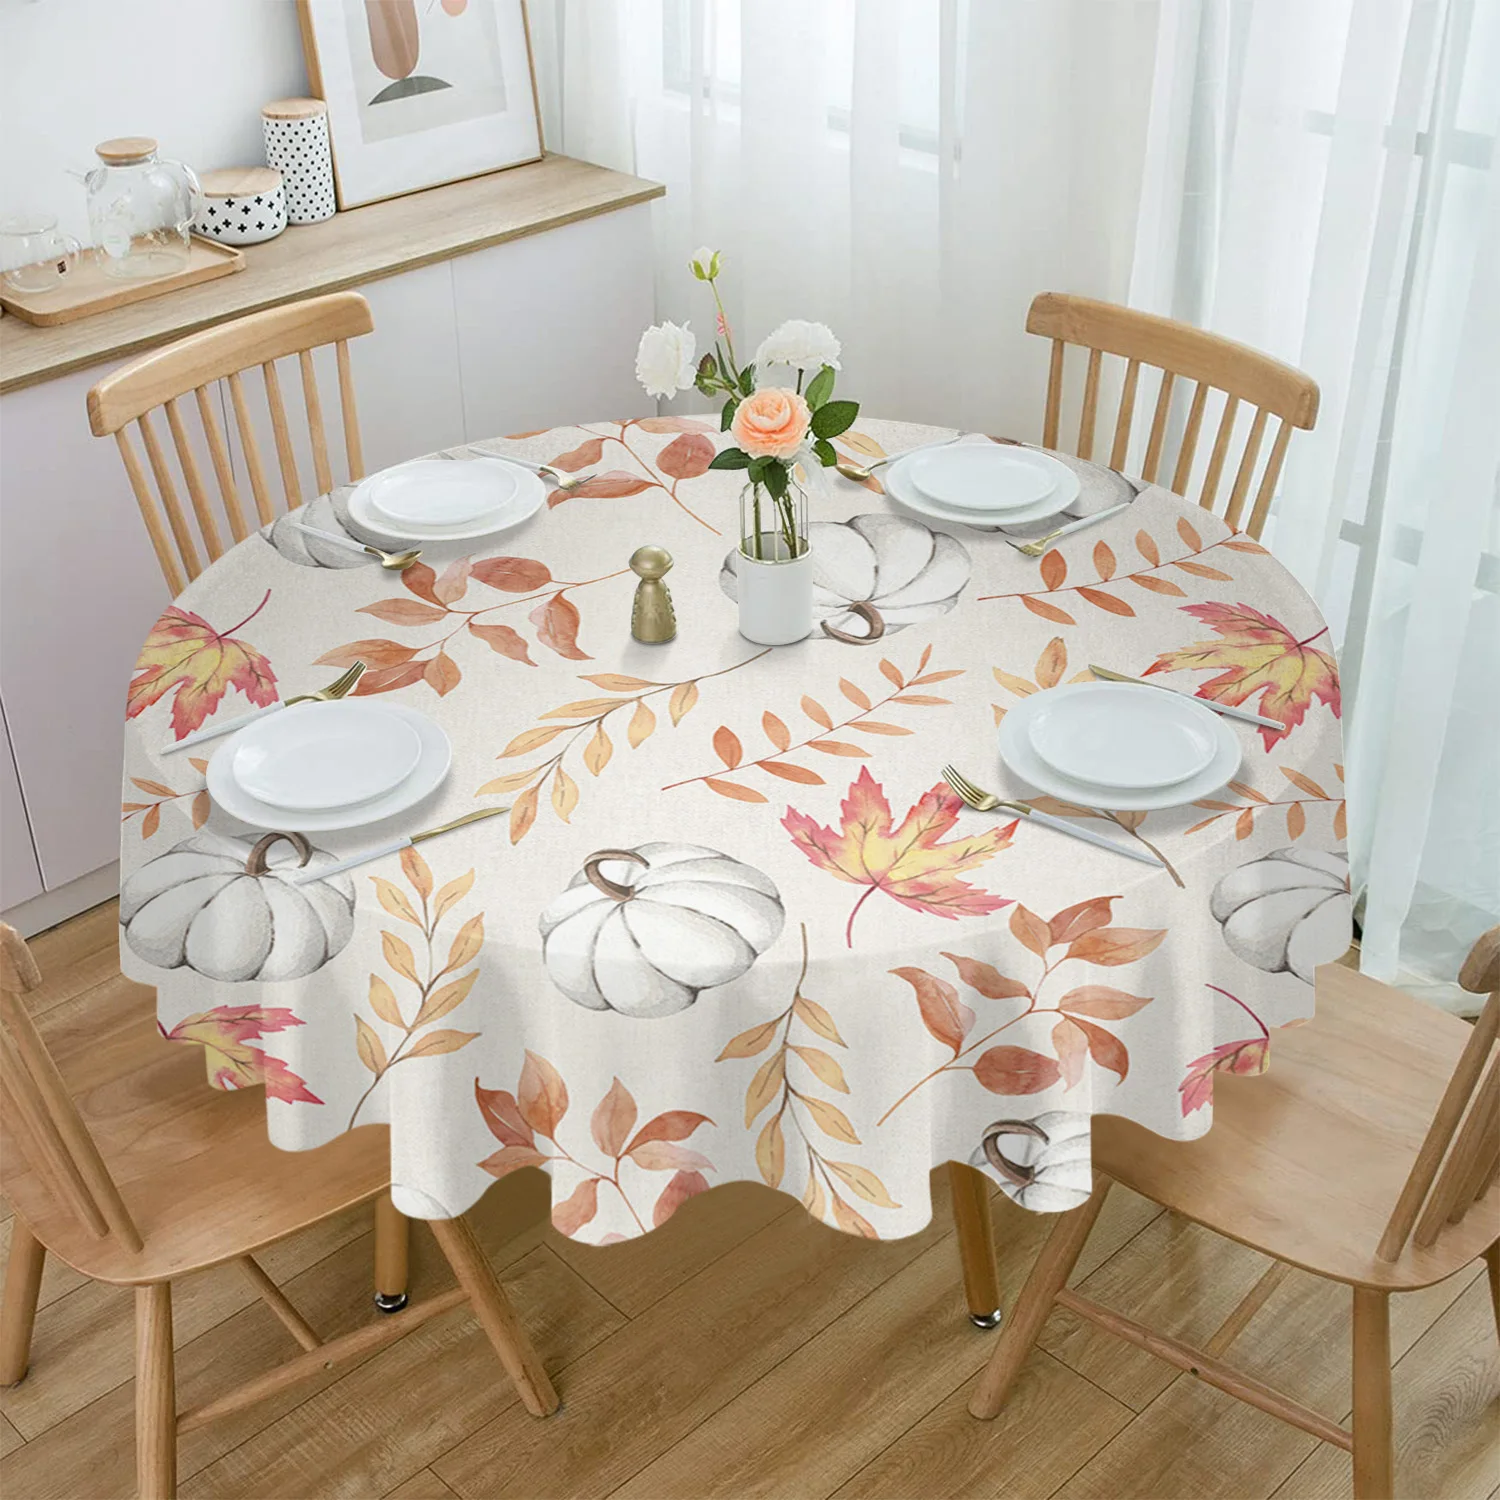 

Autumn Maple Leaves Pumpkin Round Tablecloth Party Kitchen Dinner Table Cover Holiday Decor Tablecloths Coffee Picnic Mat